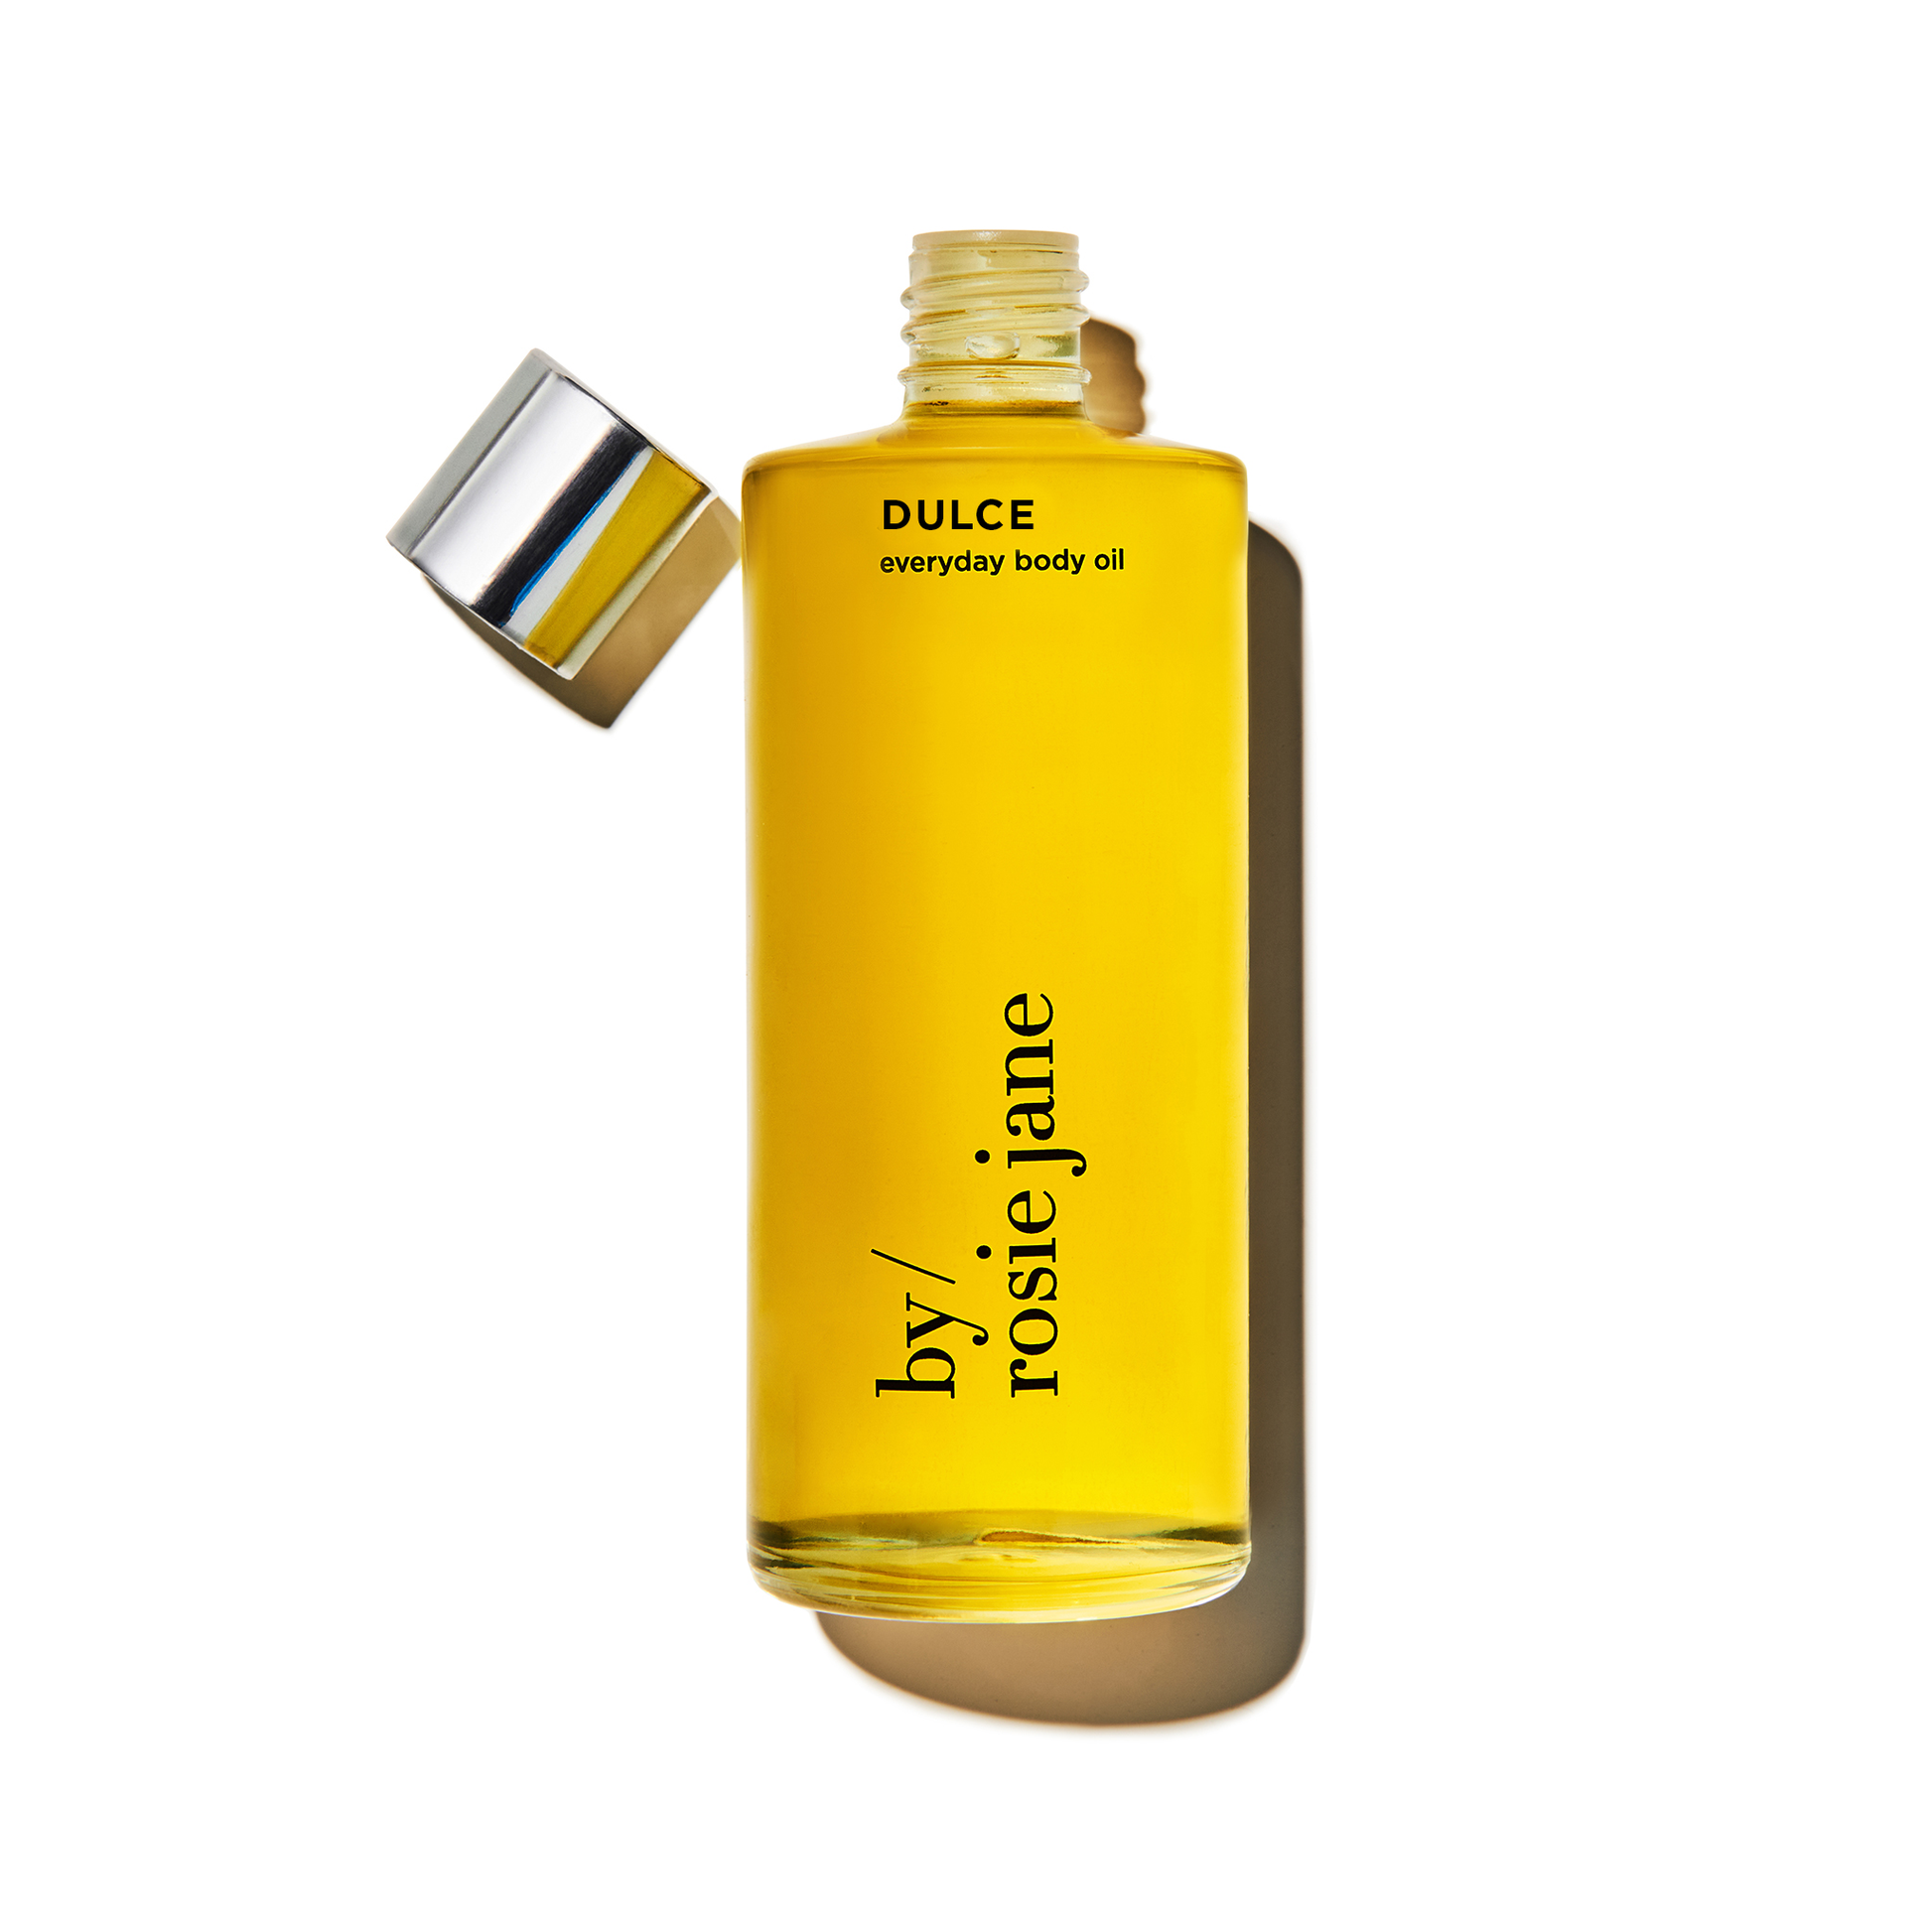 dulce body oil without cap